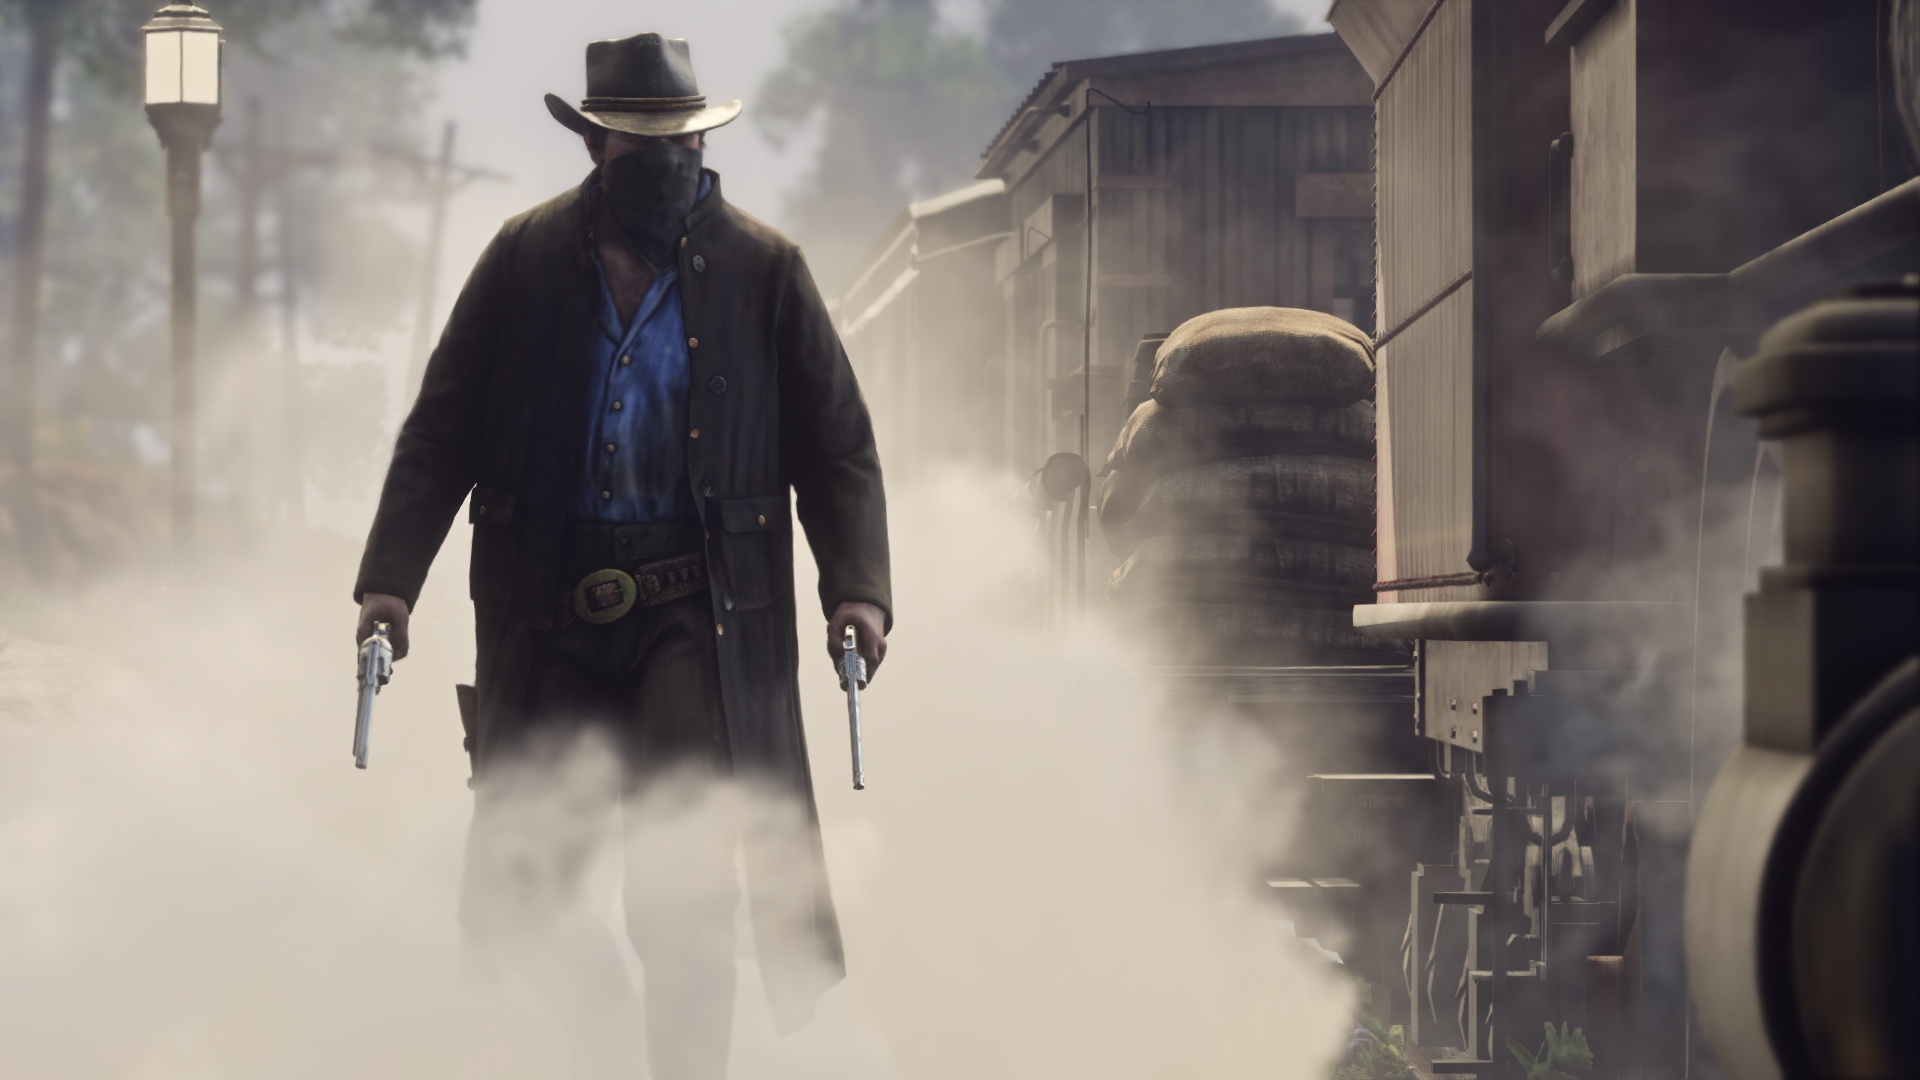 Dead Redemption 2 Trailer New Story and Gameplay Details